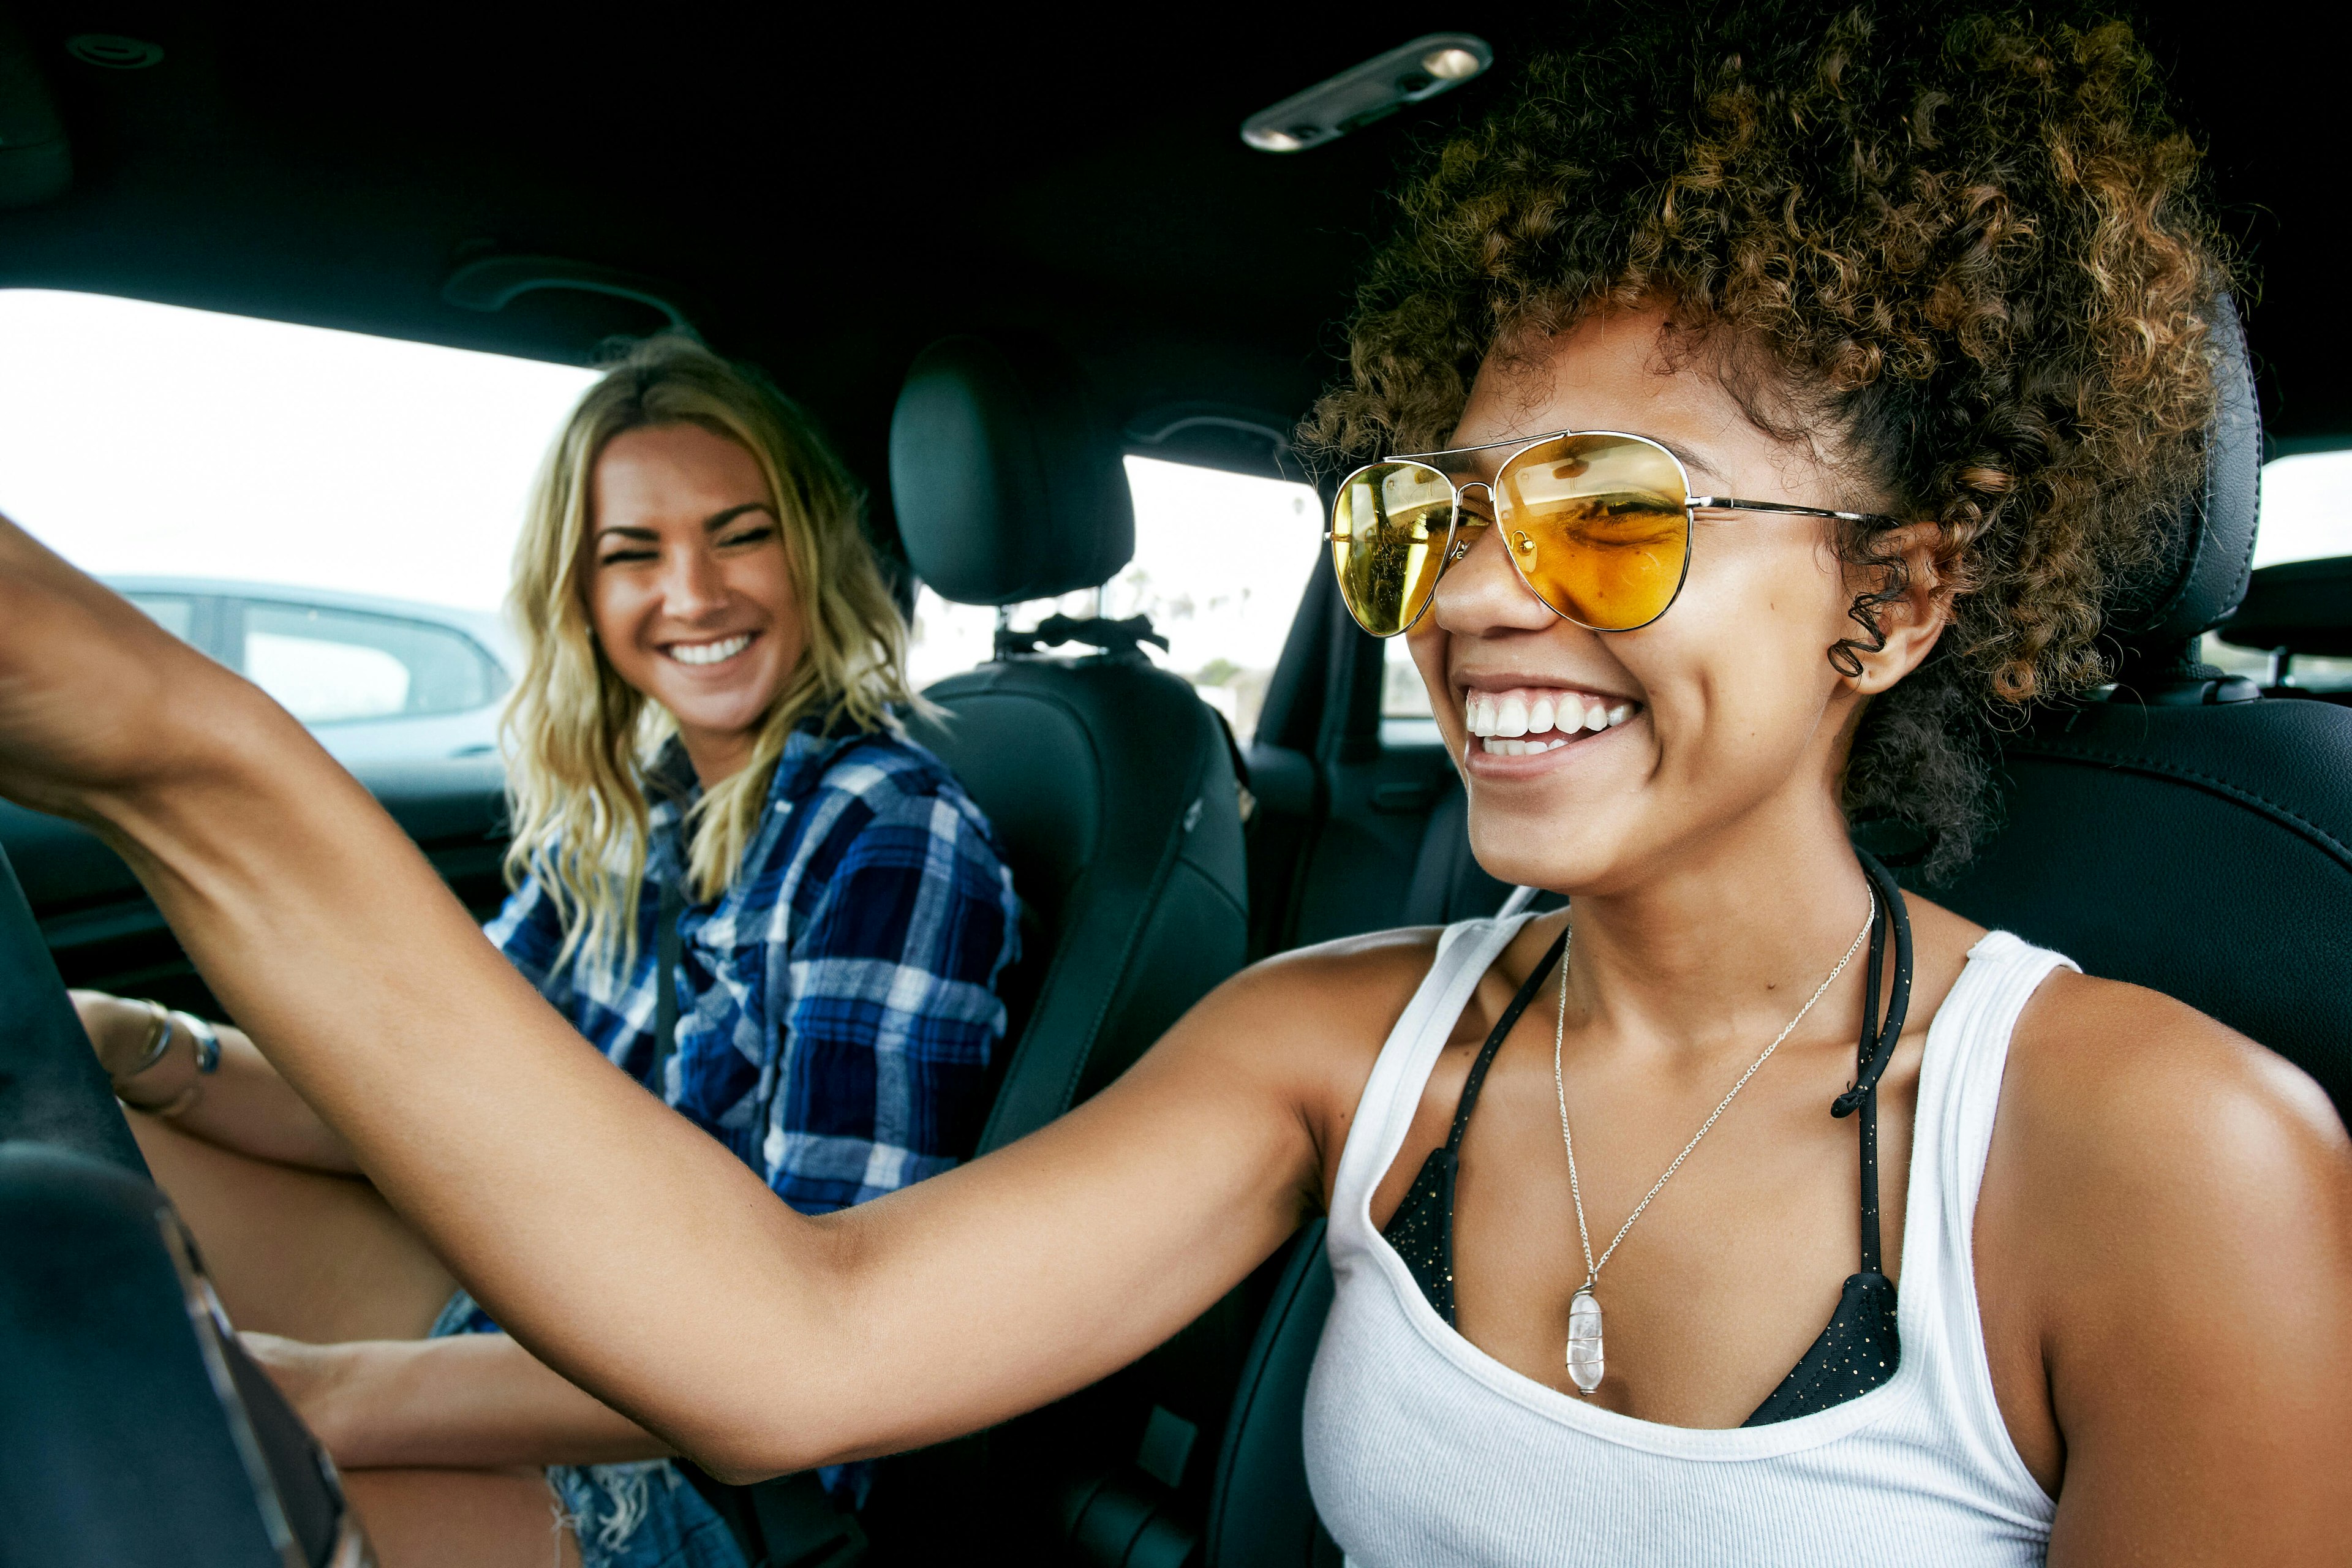 Portrait of two women with long blond and brown curly hair sitting in car, wearing sunglasses, smiling. - stock photo